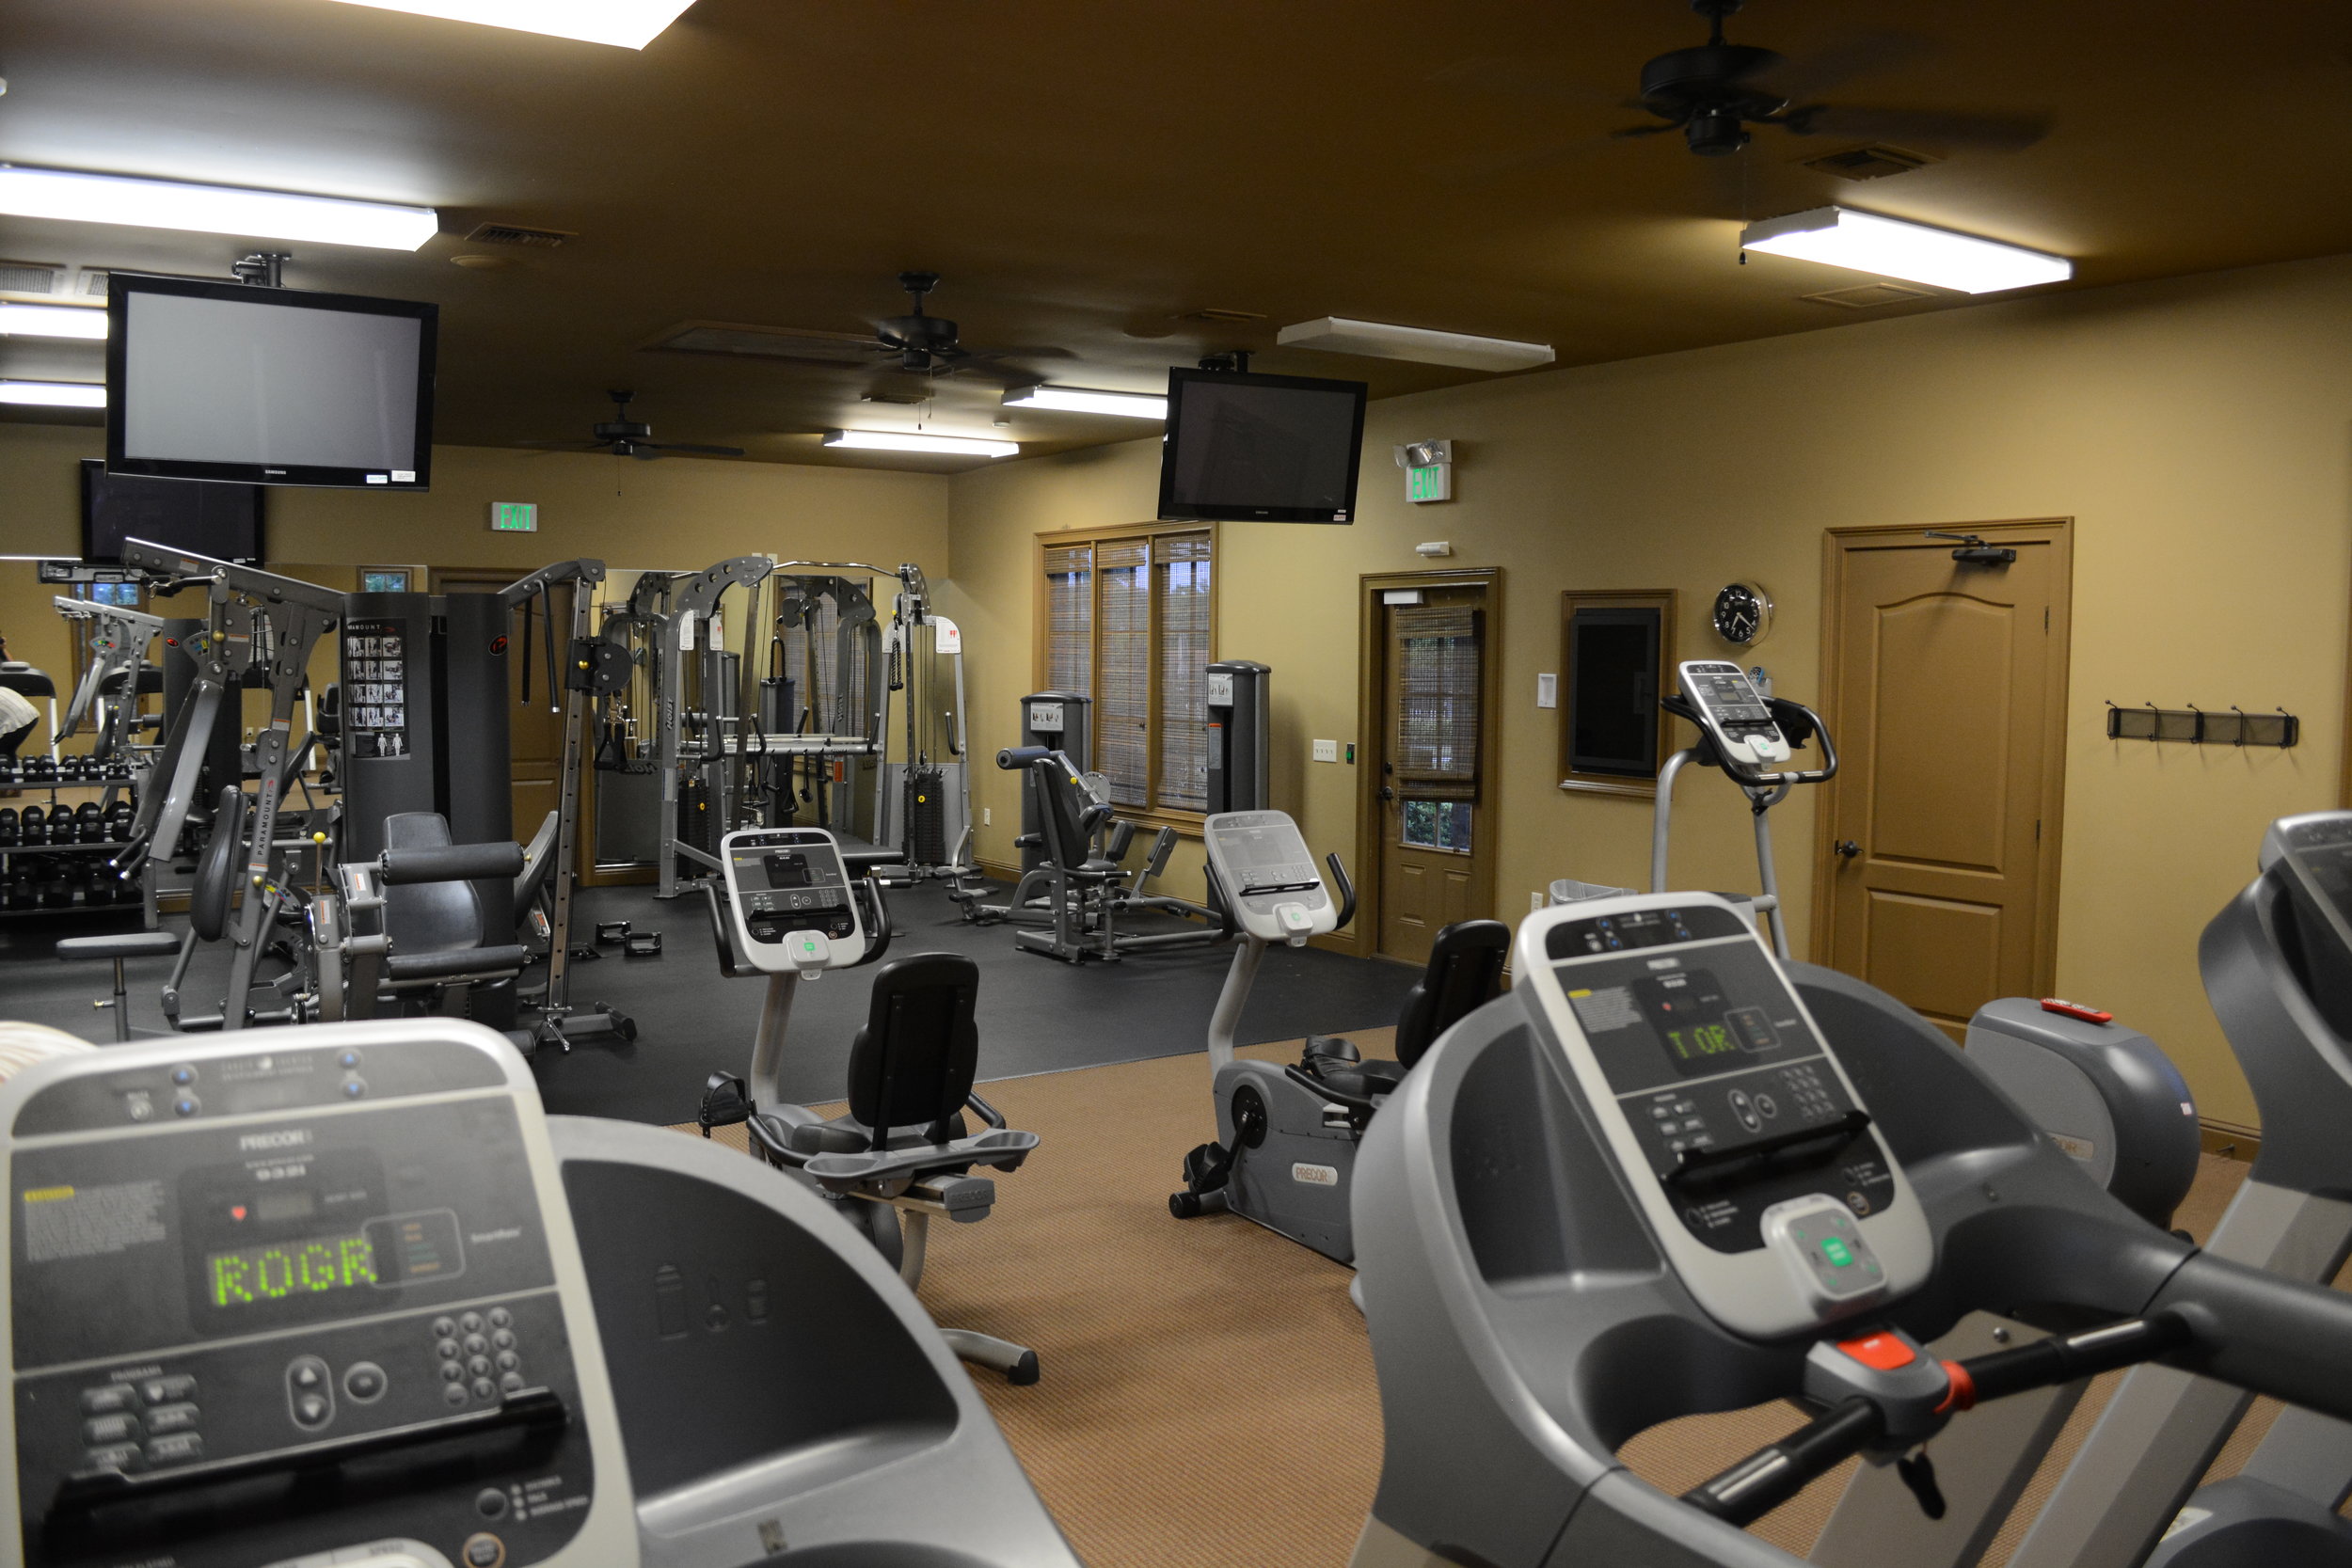 No gym membership needed with a 24-hour access fitness center in your private clubhouse. 